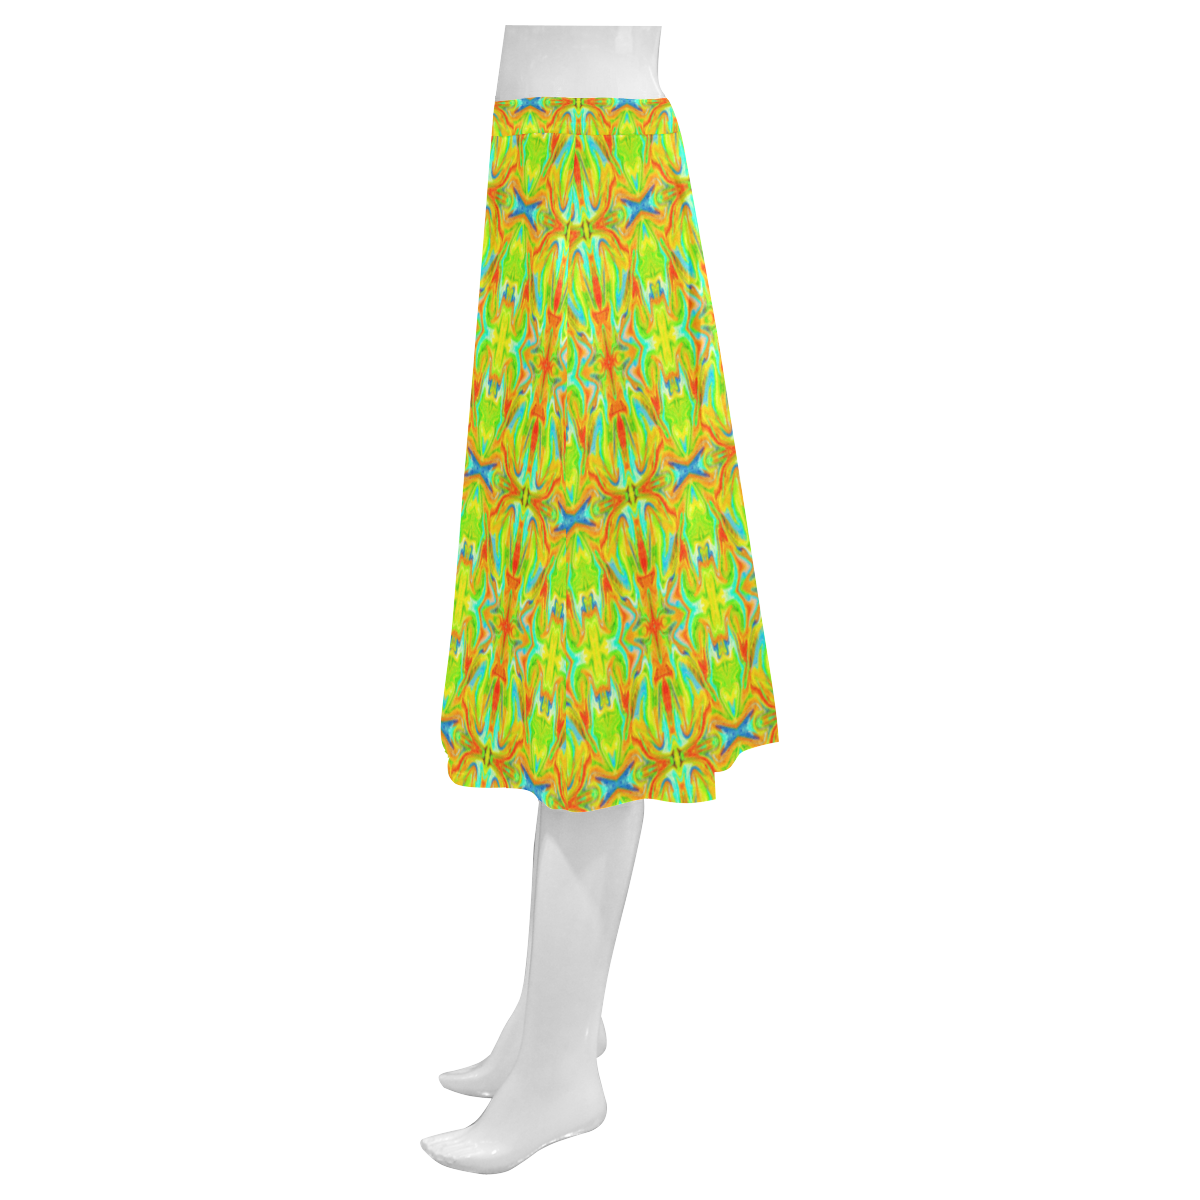 Multicolor Abstract Figure Pattern Mnemosyne Women's Crepe Skirt (Model D16)